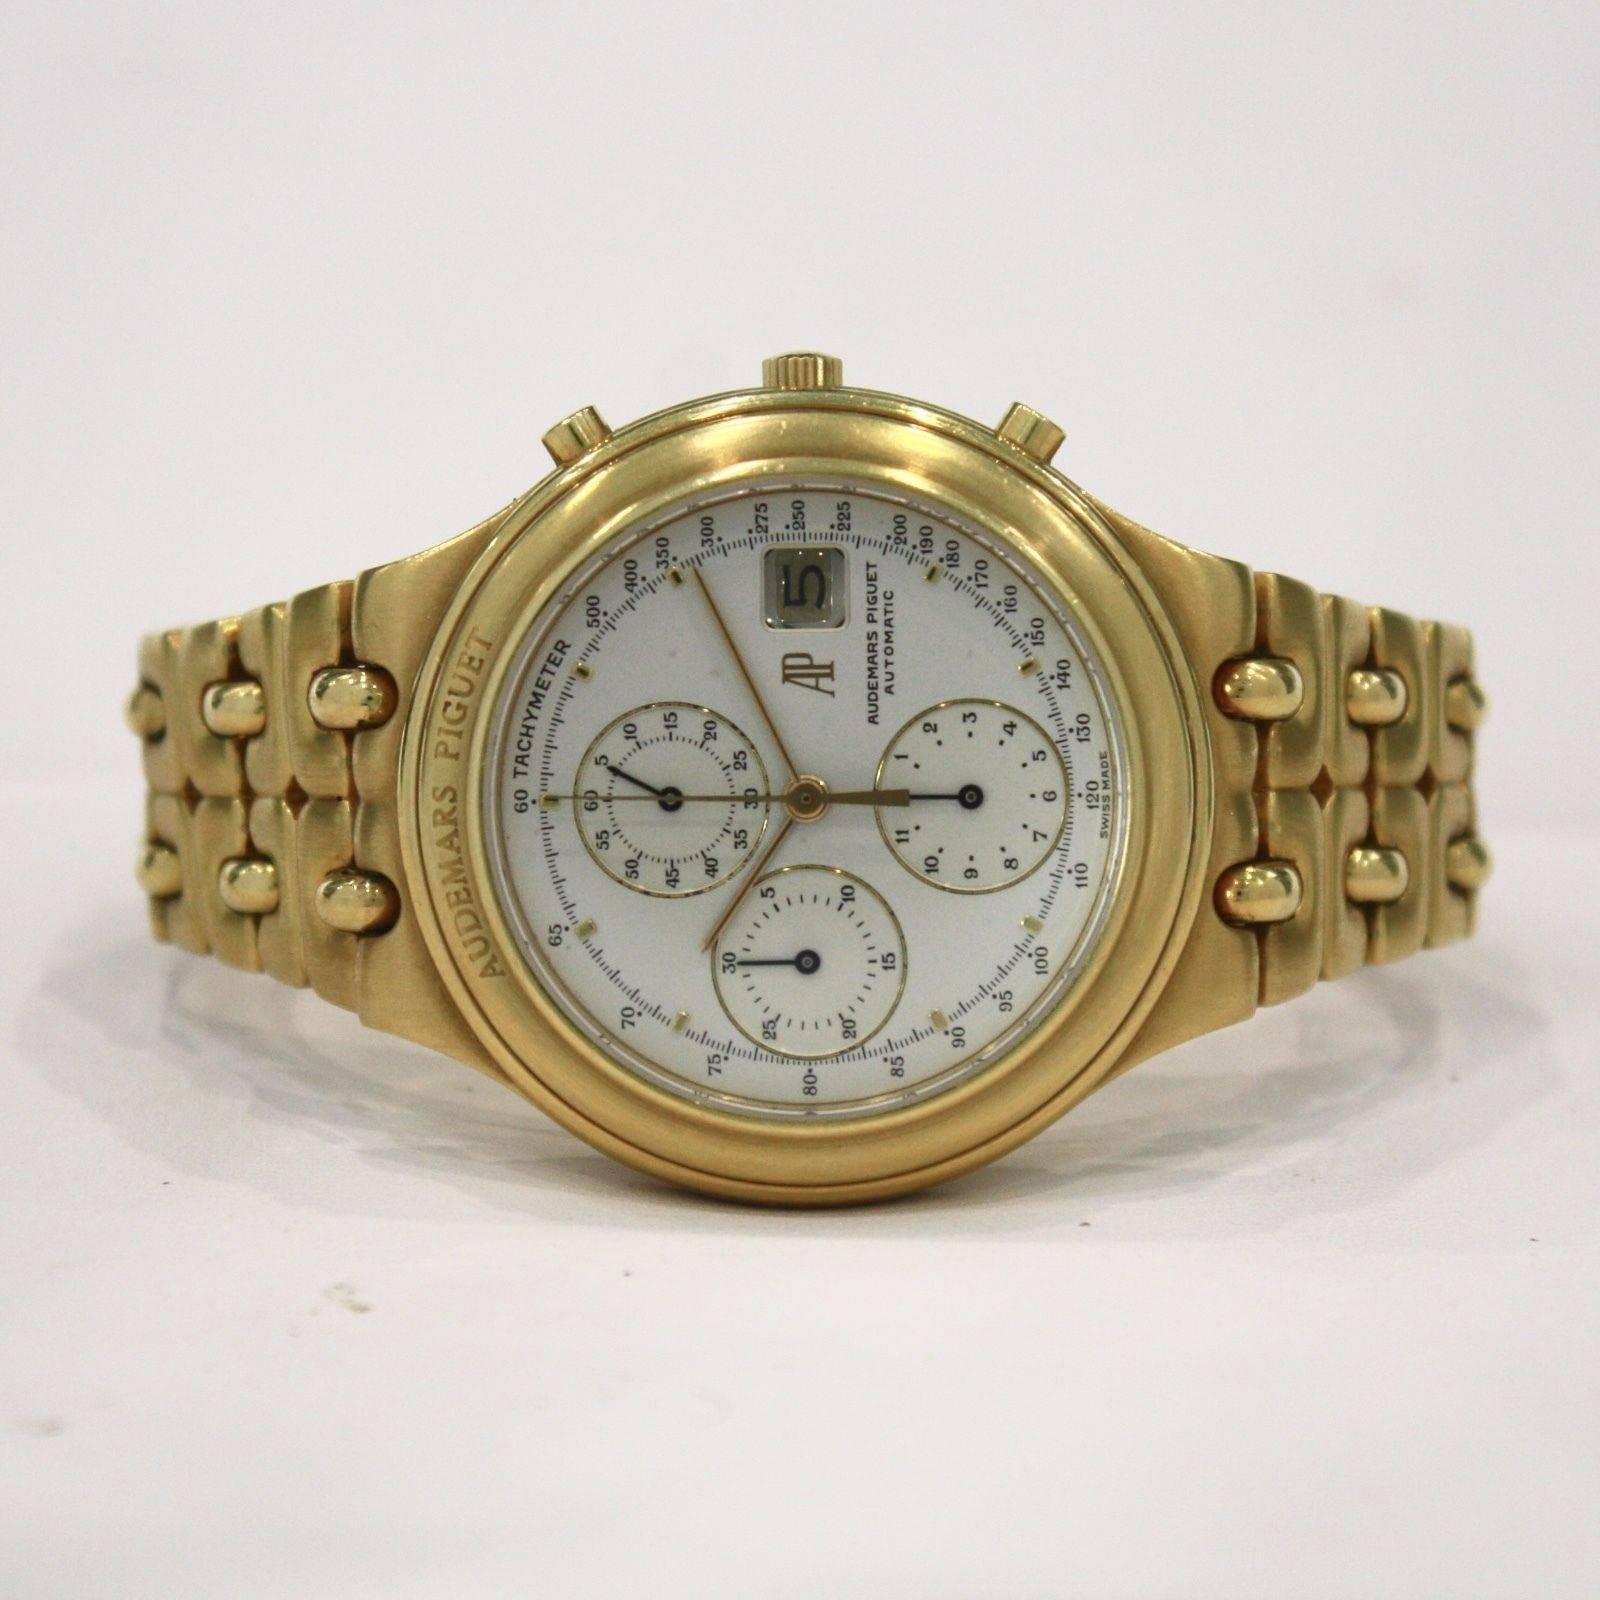 Brand Name	Audemars Piguet
Style Number	25644A
Series	Huitieme Chronograph
Gender	Men's
Case Material	18k Yellow Gold
Dial Color	Silvered Dial
Movement	Automatic
Engine	Cal. 2126/2840
Functions	Hours, Minutes, Seconds, Chronograph
Crystal